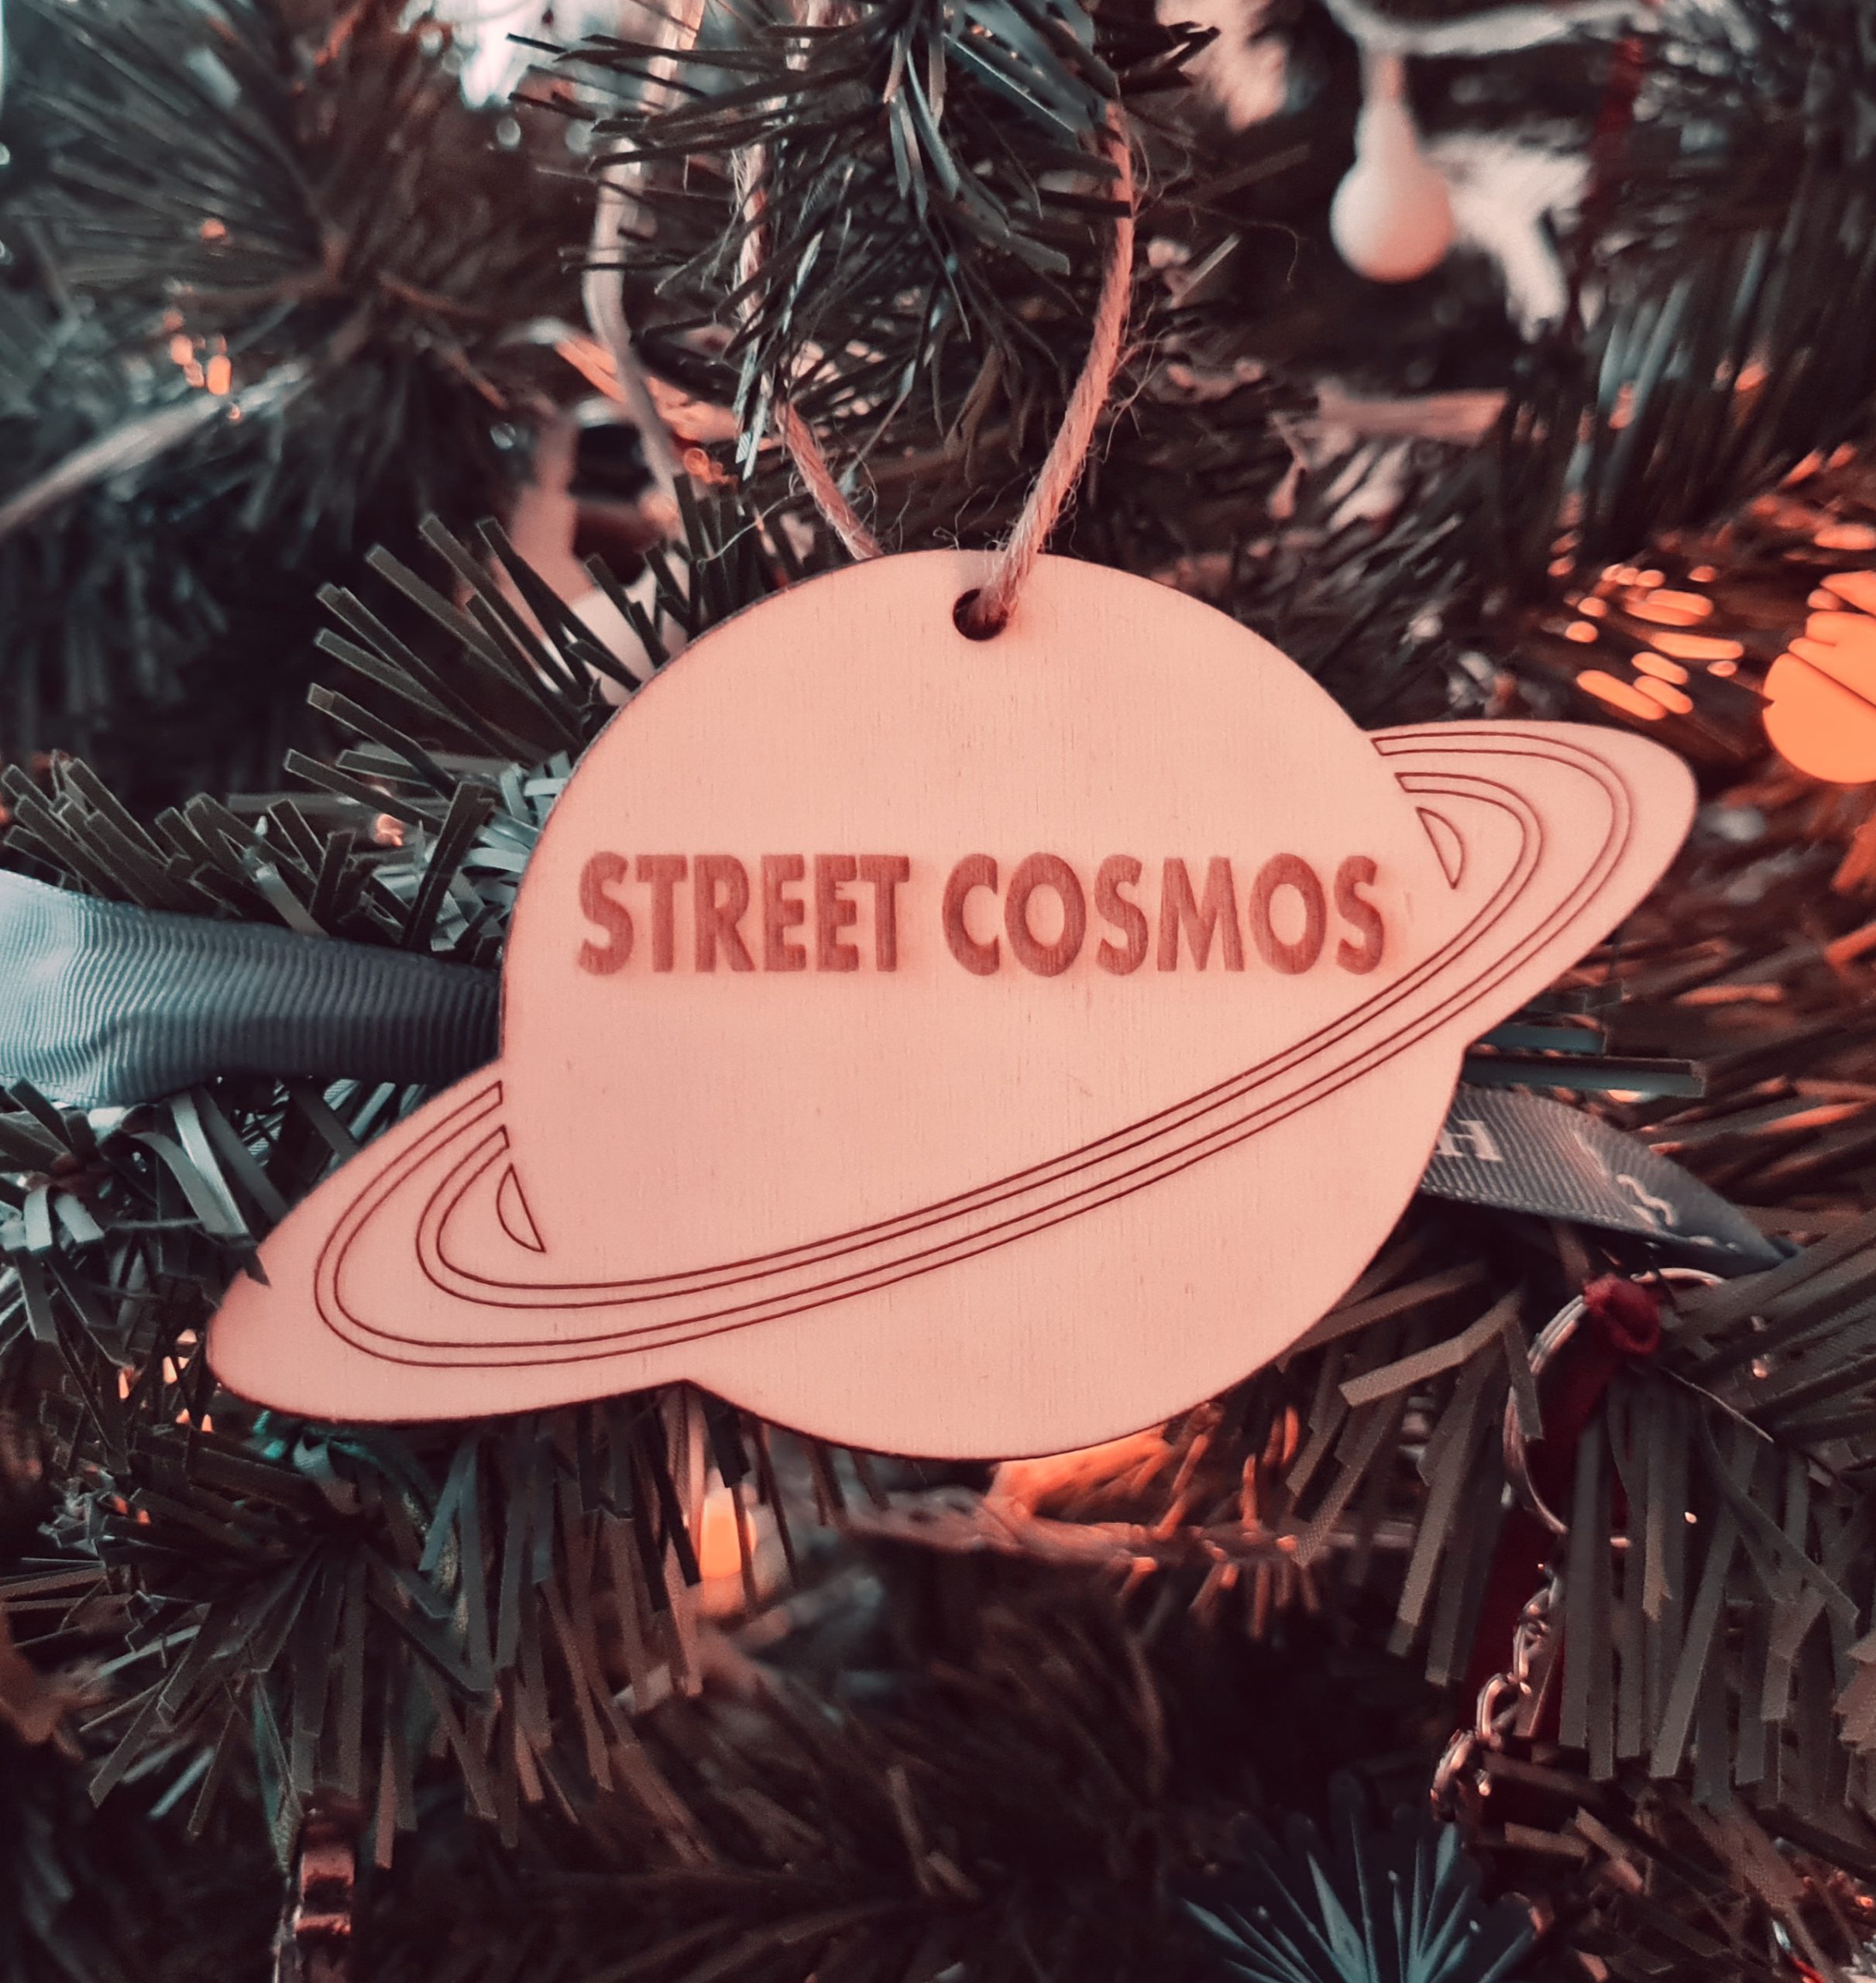 Merry Christmas and Happy New Year from Street Cosmos!!